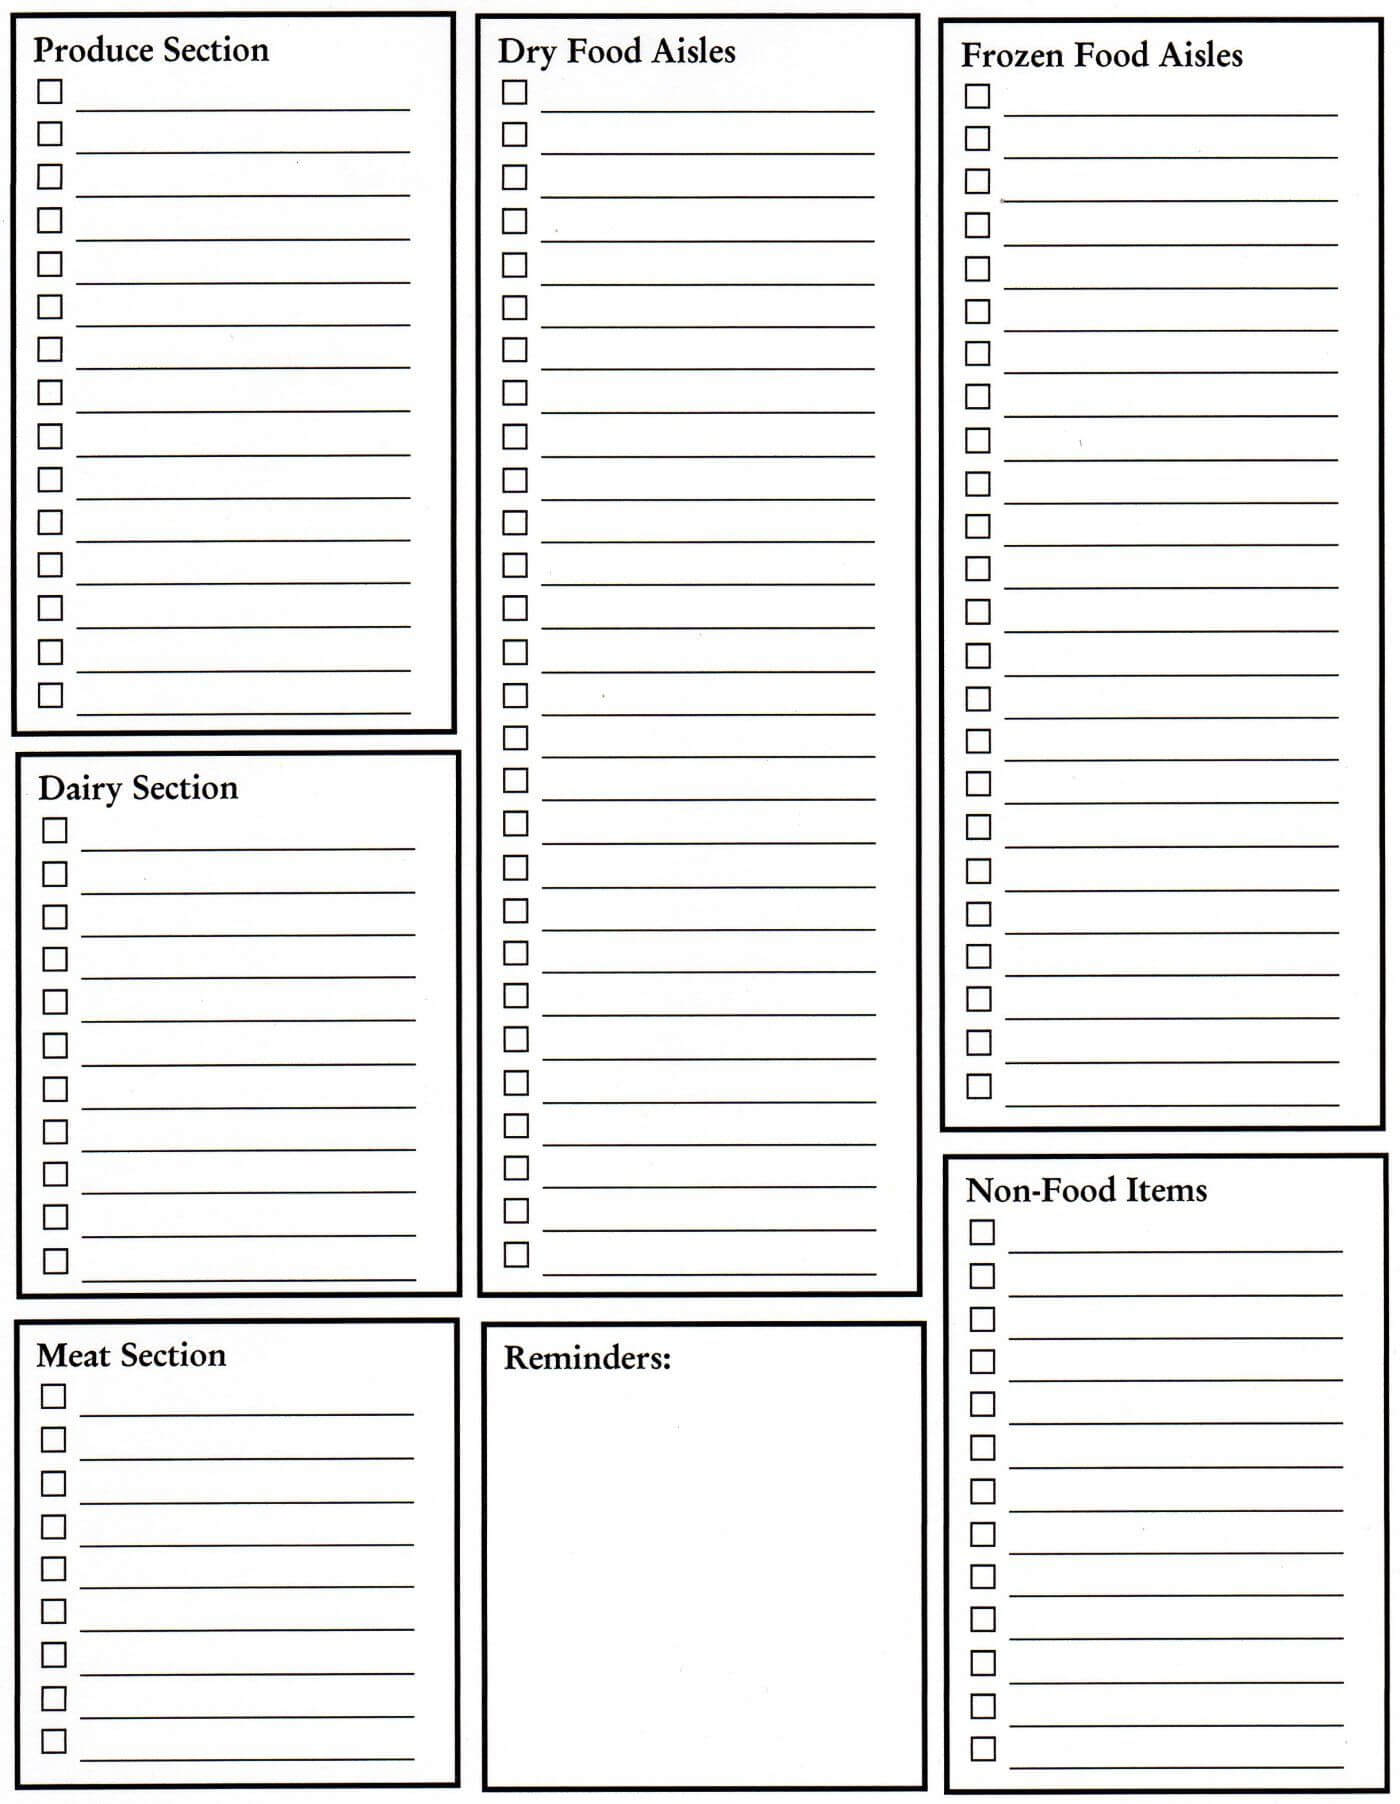 Grocery List Blank Template Great Idea, Need To Keep On Pertaining To Blank Grocery Shopping List Template